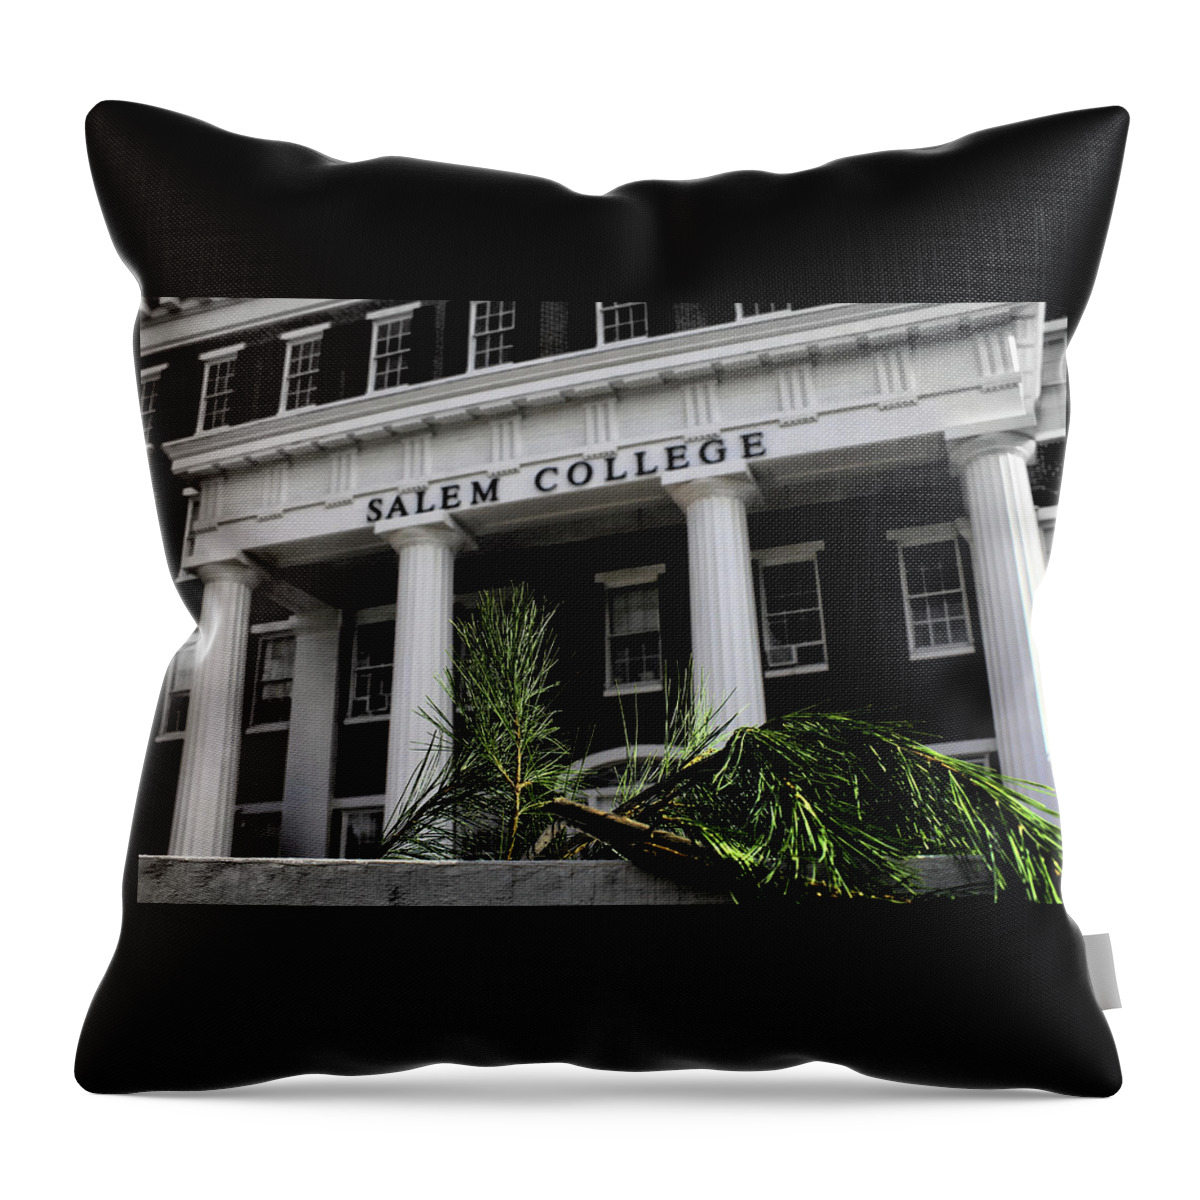 Salem College Throw Pillow featuring the photograph Salem College by Jessica Brawley